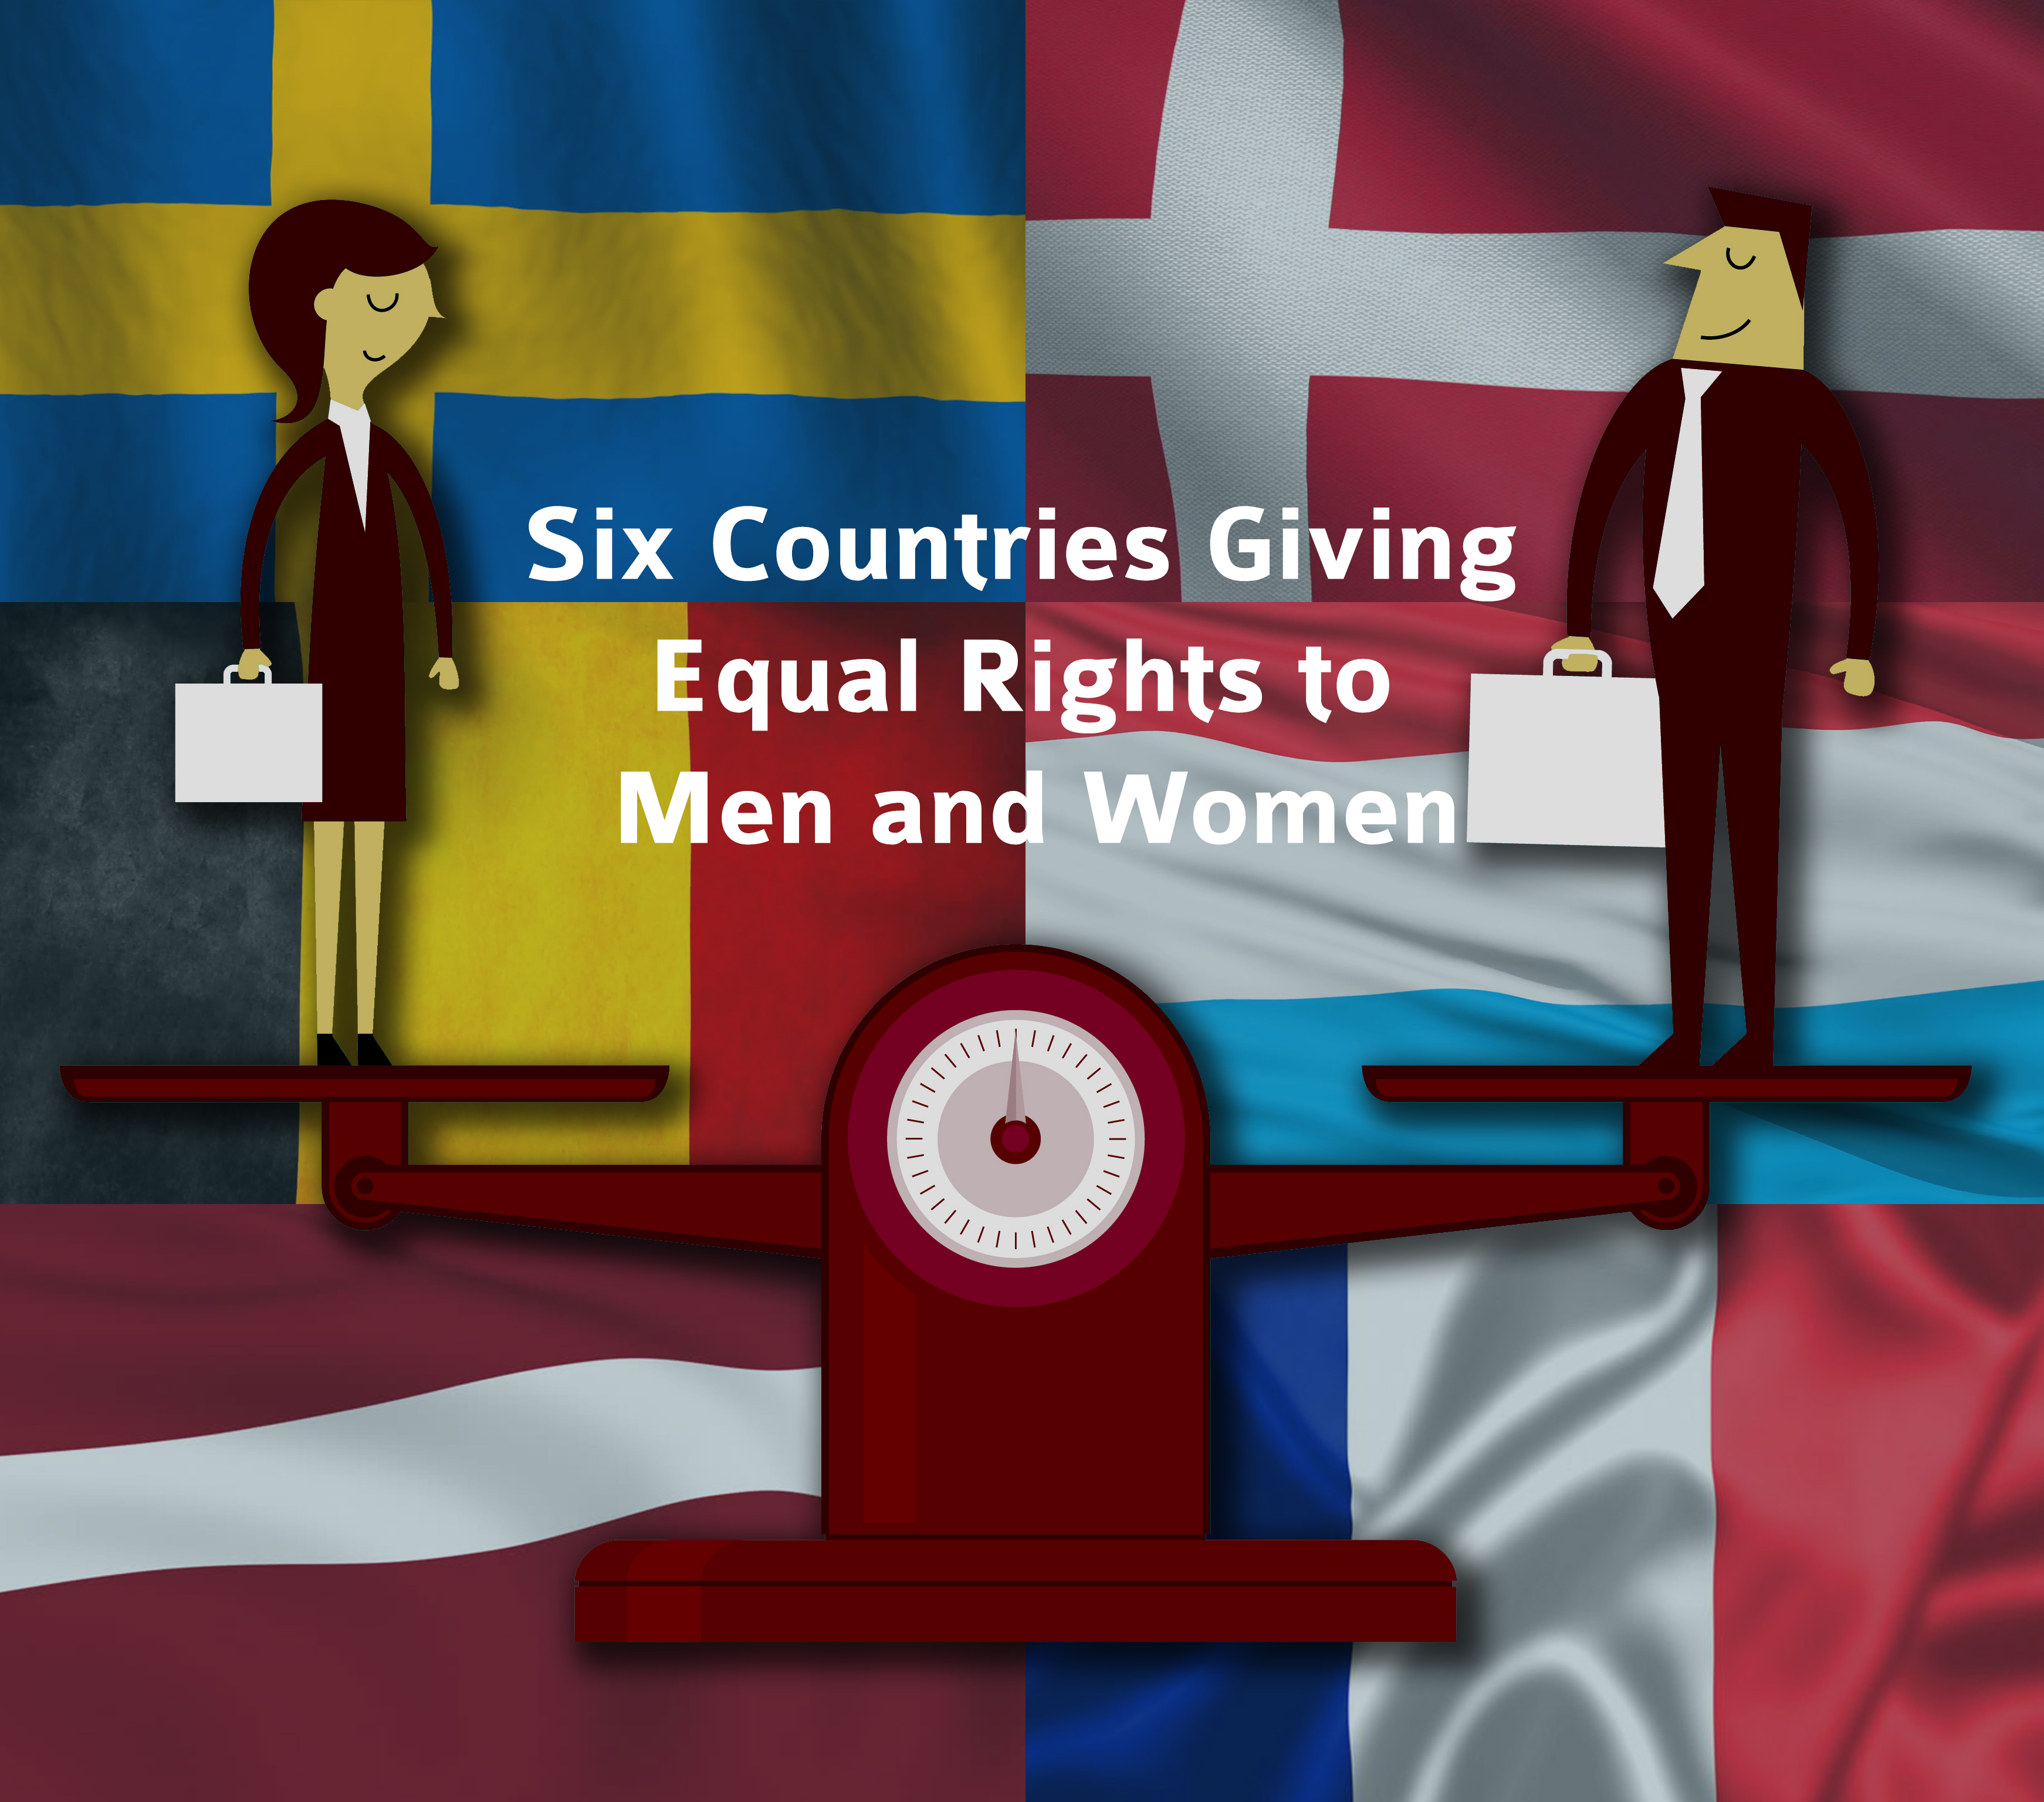 Six Countries Giving Equal Rights to Men and Women